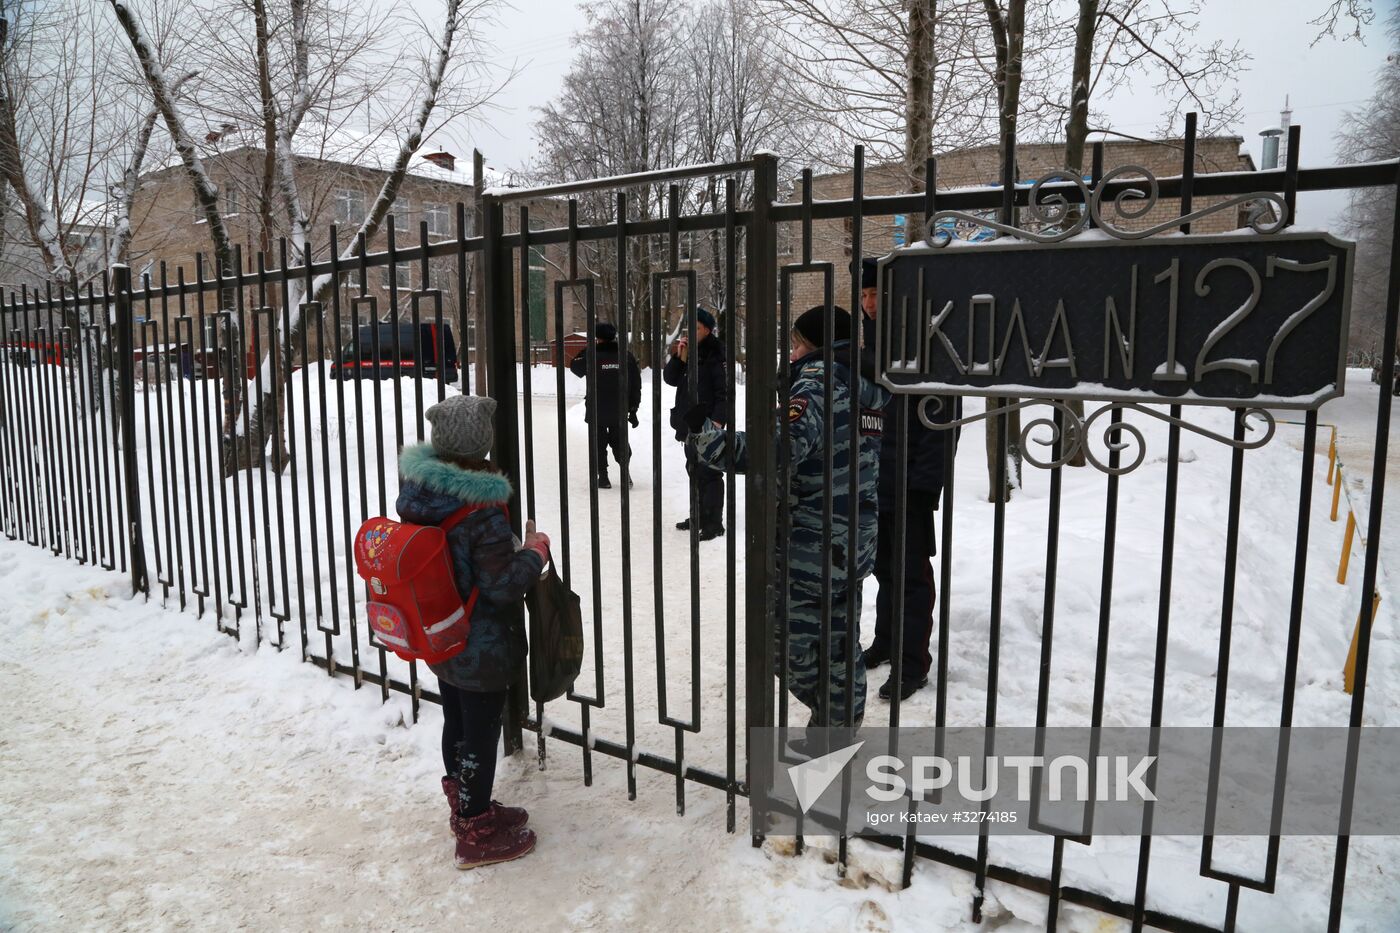 Incident at School 127 in Perm